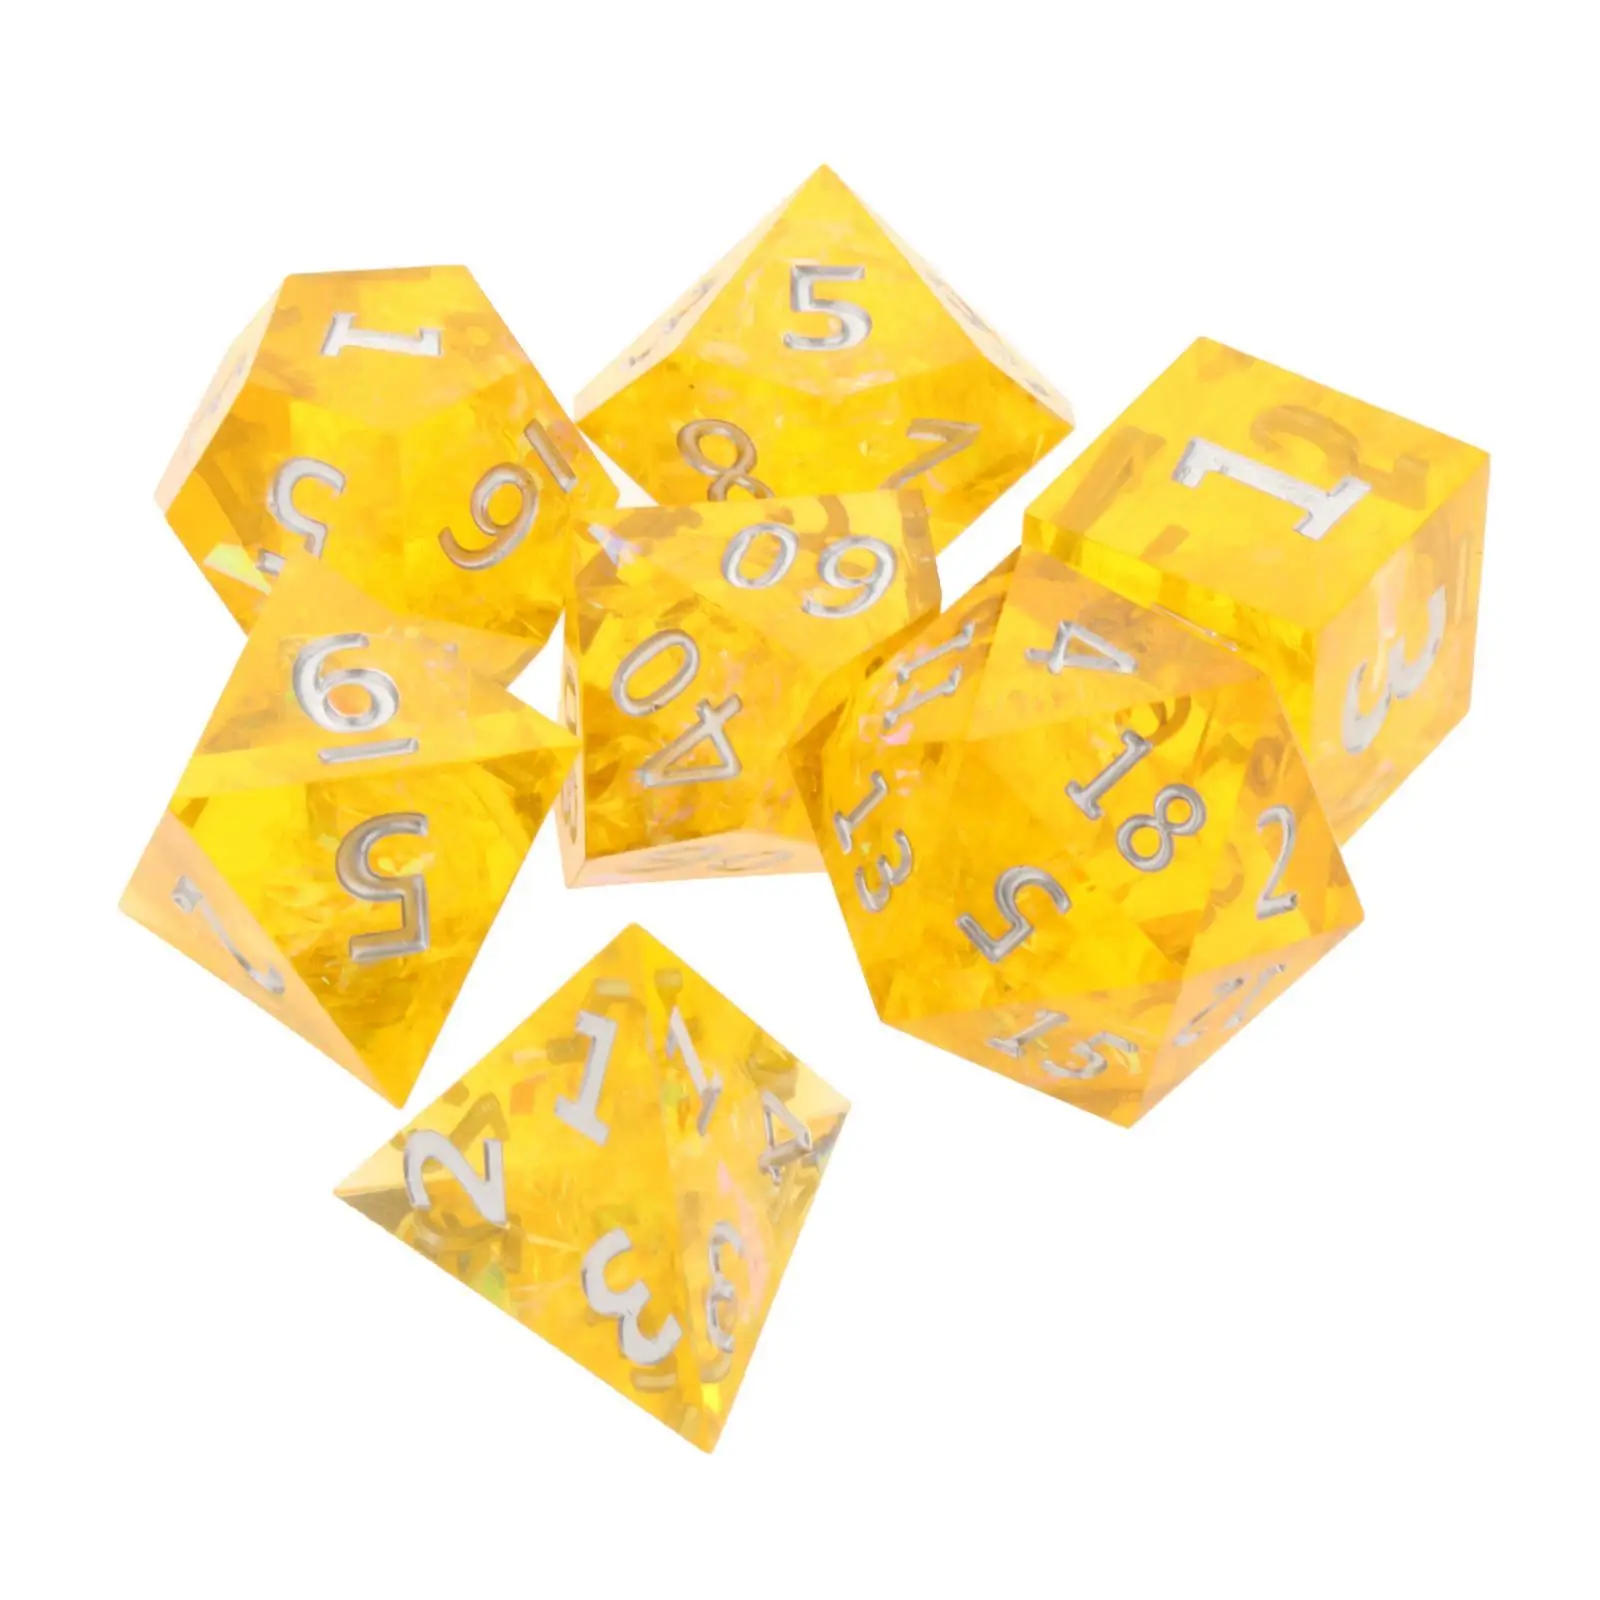 Polyhedral Dice Set, 7 Complete Dice Sets of D4 D6 D8 D10 D12 D20 Great for ` and  DND RPG MTG Games